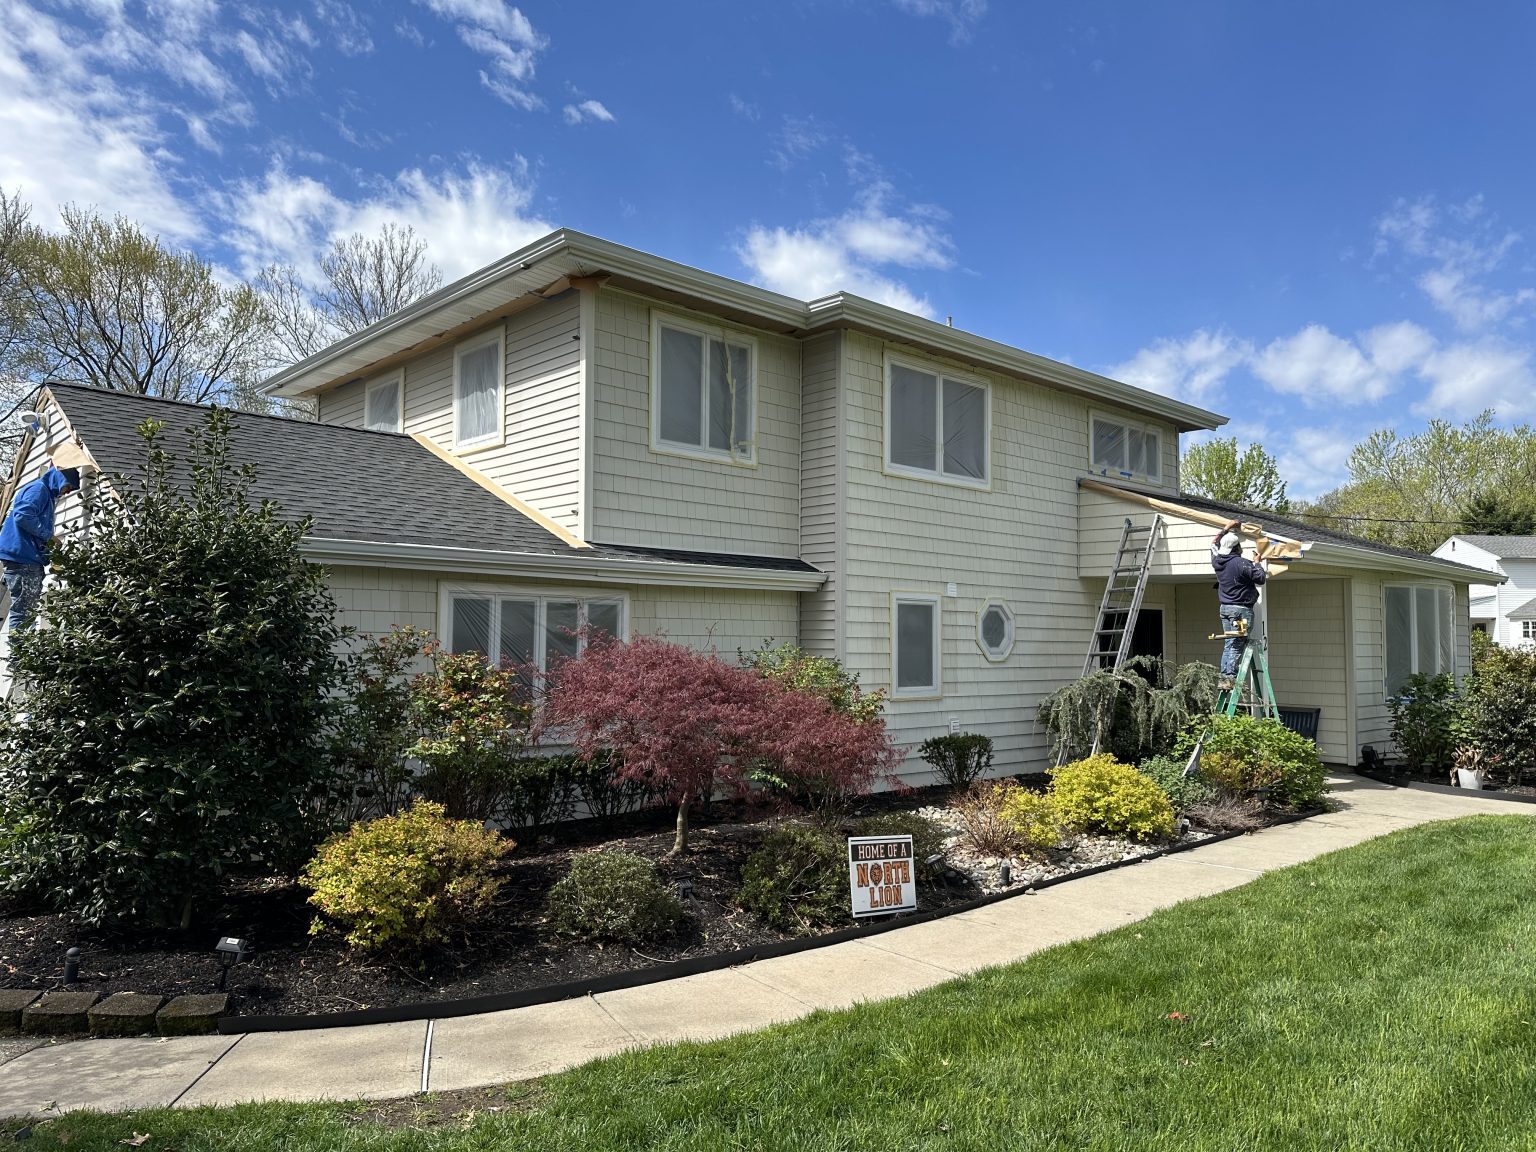 Blue Exterior Transformation for a Home in Middletown Before